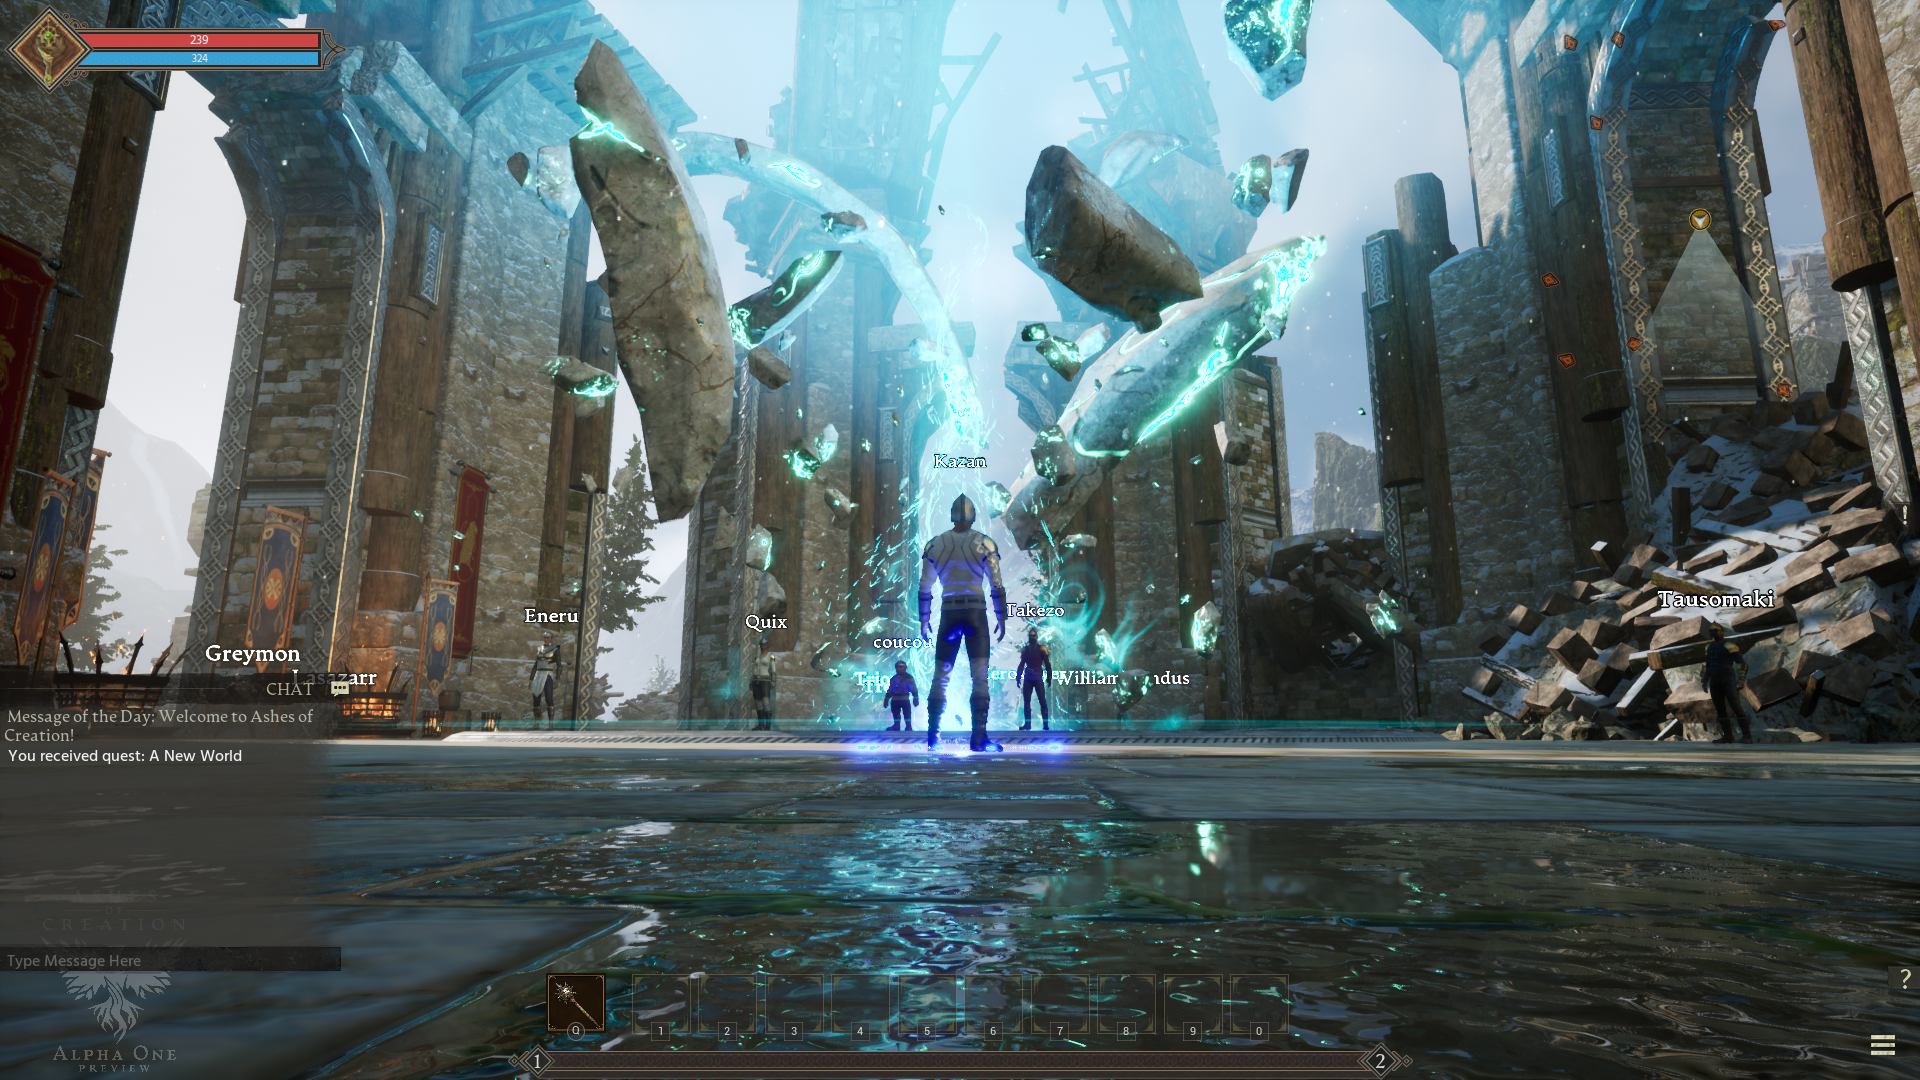 My character standing in front of the portal. The portal is made of flowing blue energy surrounded by floating rocks.